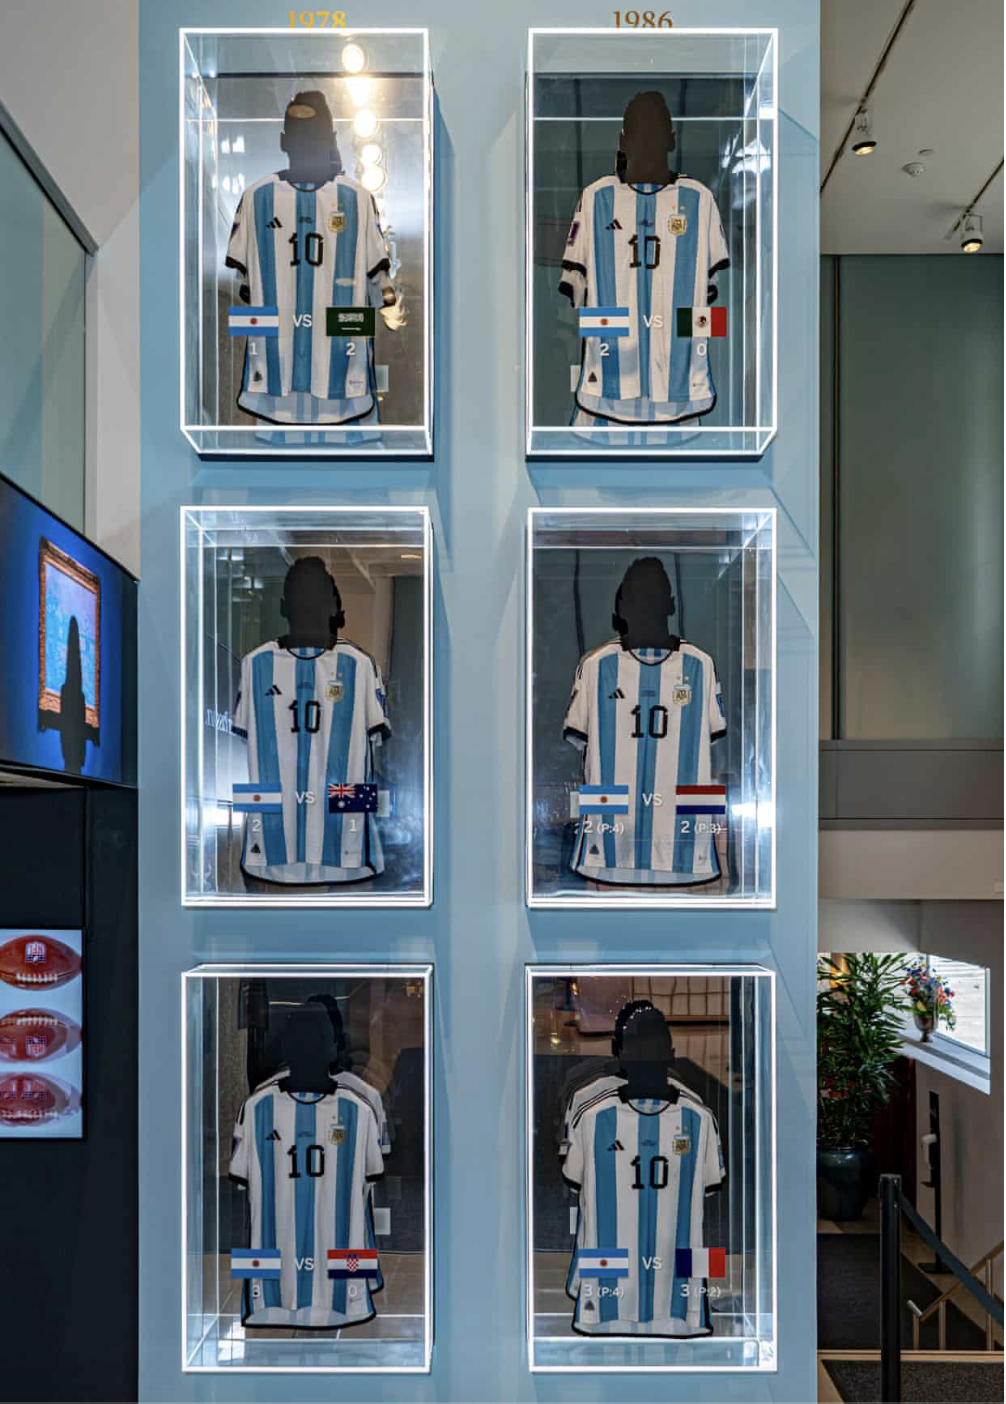 The six shirts worn by Messi during Argentina’s 2022 World Cup campaign on display at Sotheby’s in New York. Photograph: Peter K Afriyie/AP